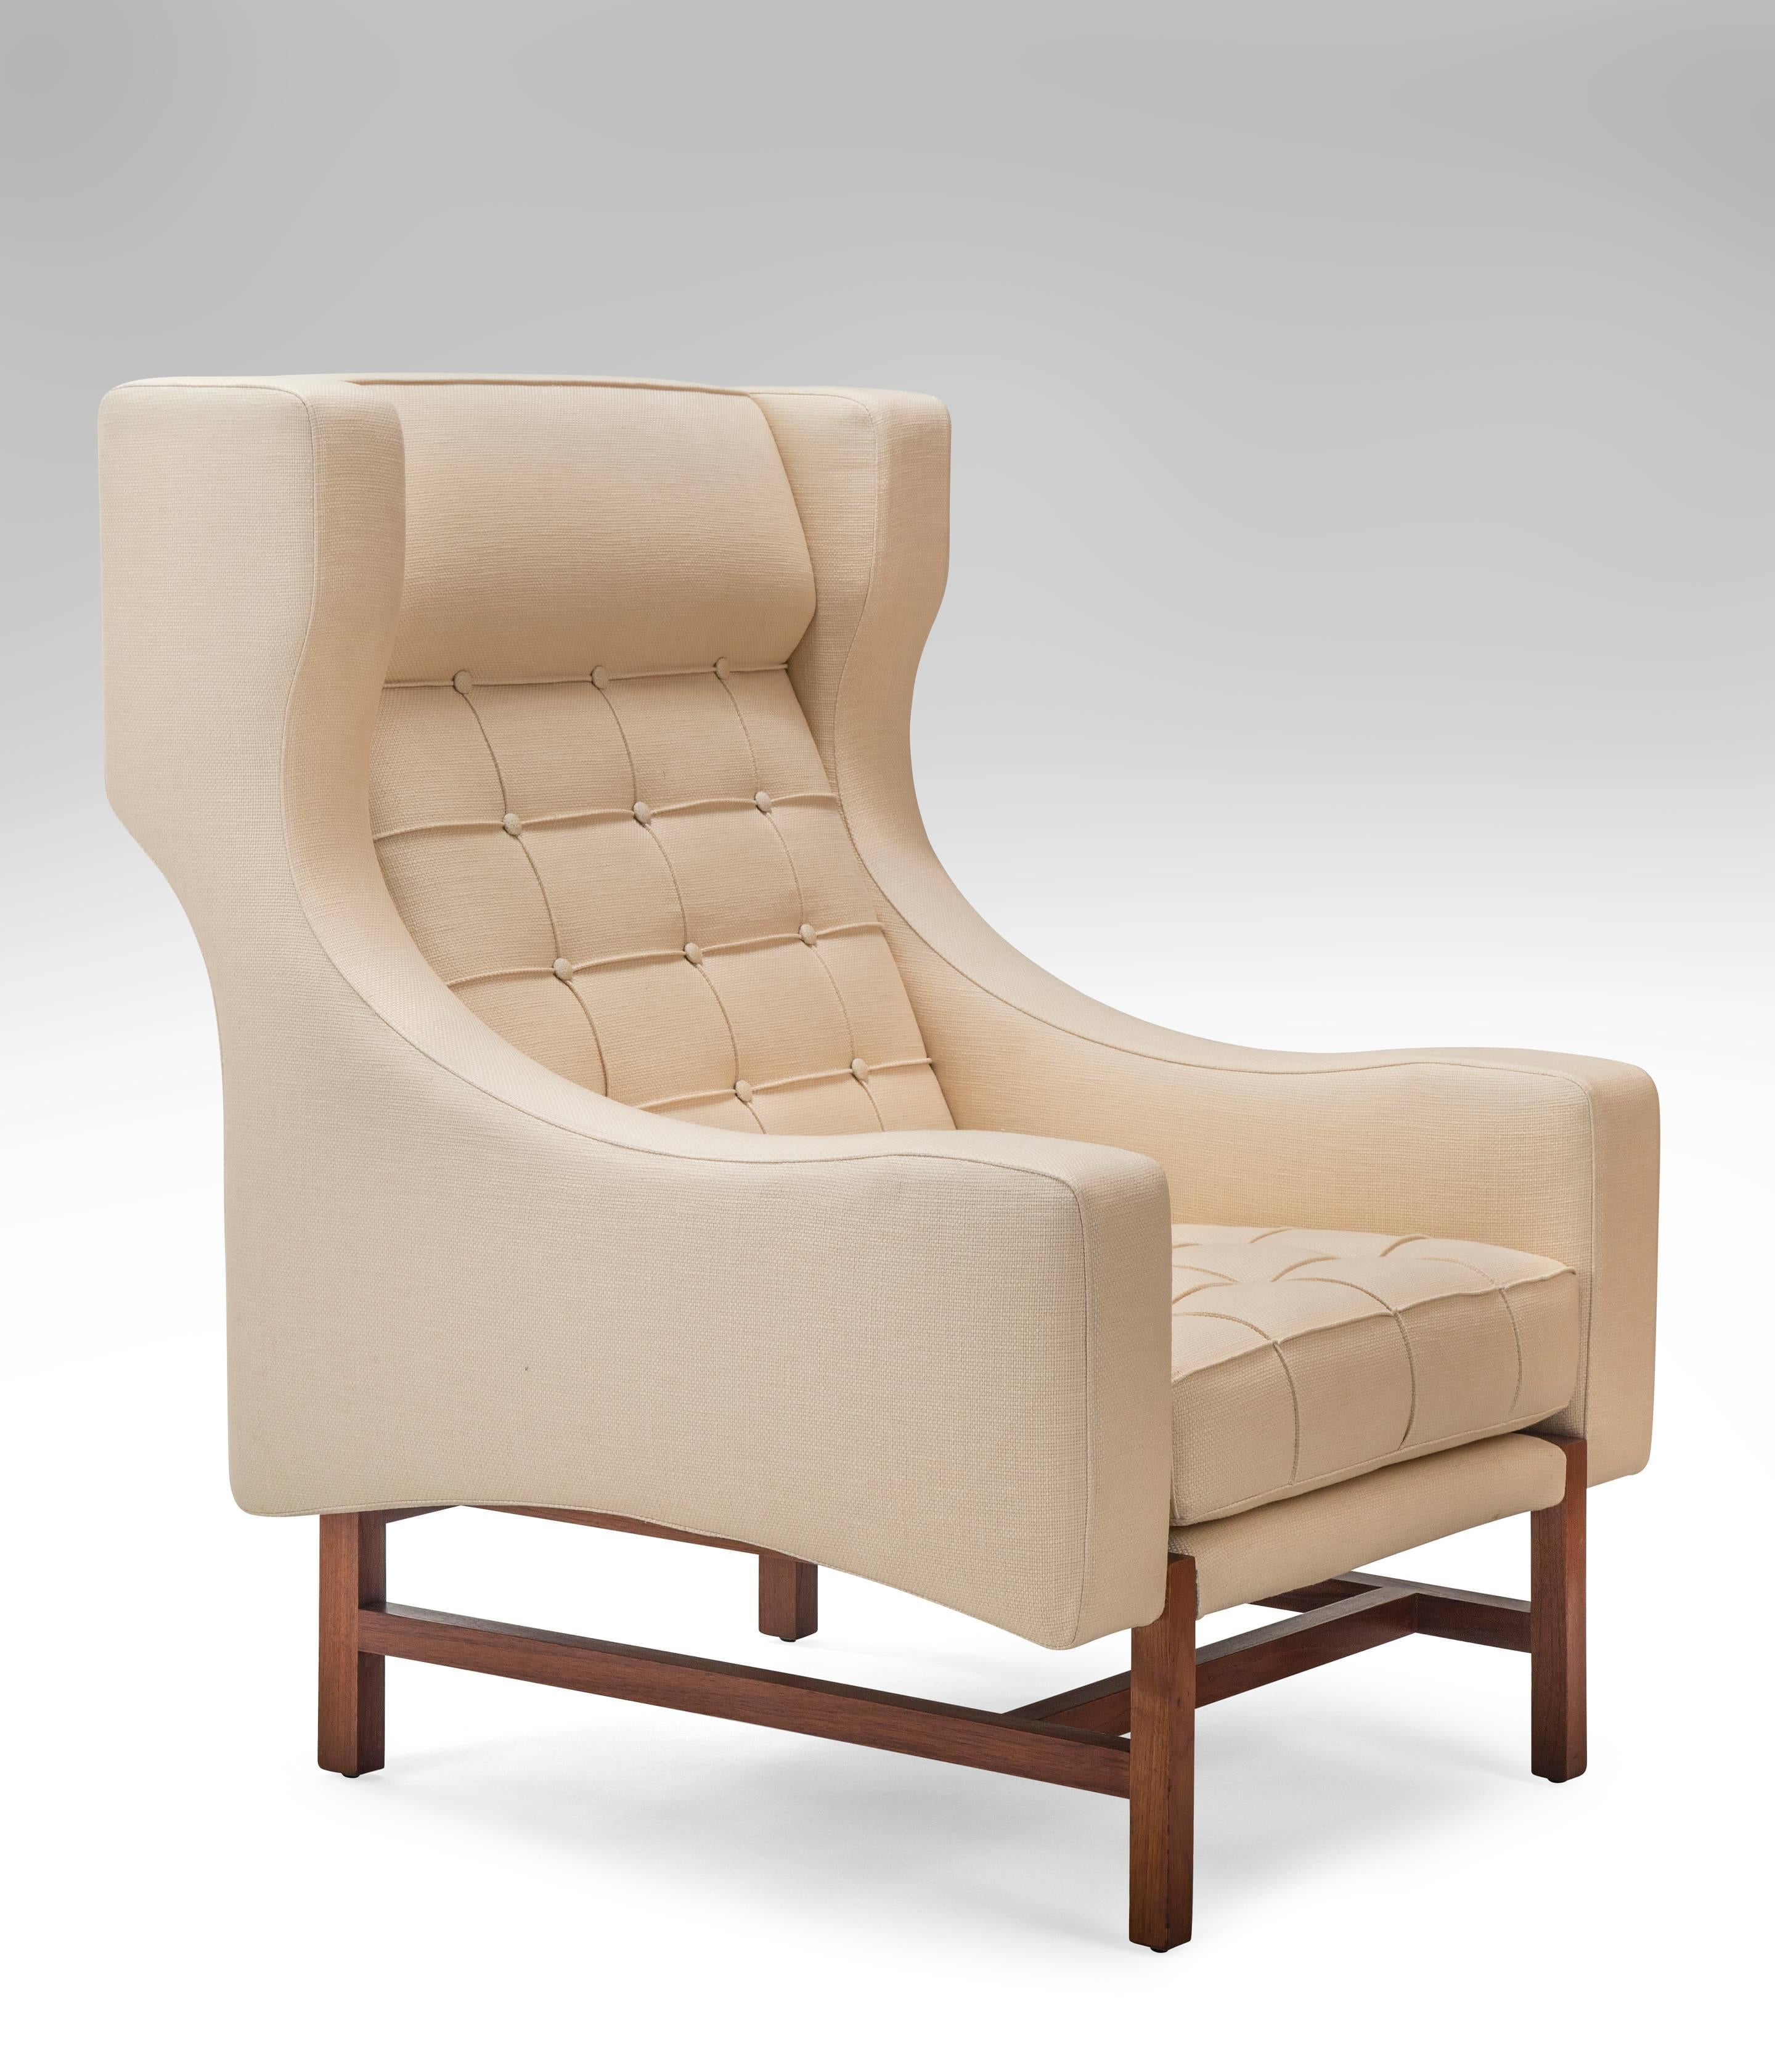 Very rare stylish wingback chairs and ottomans, large scale and comfortable. The inventive updated wingback above a square seat flanked by shaped arms, resting on walnut legs joined by stretchers, the seat and back fabric stitched with